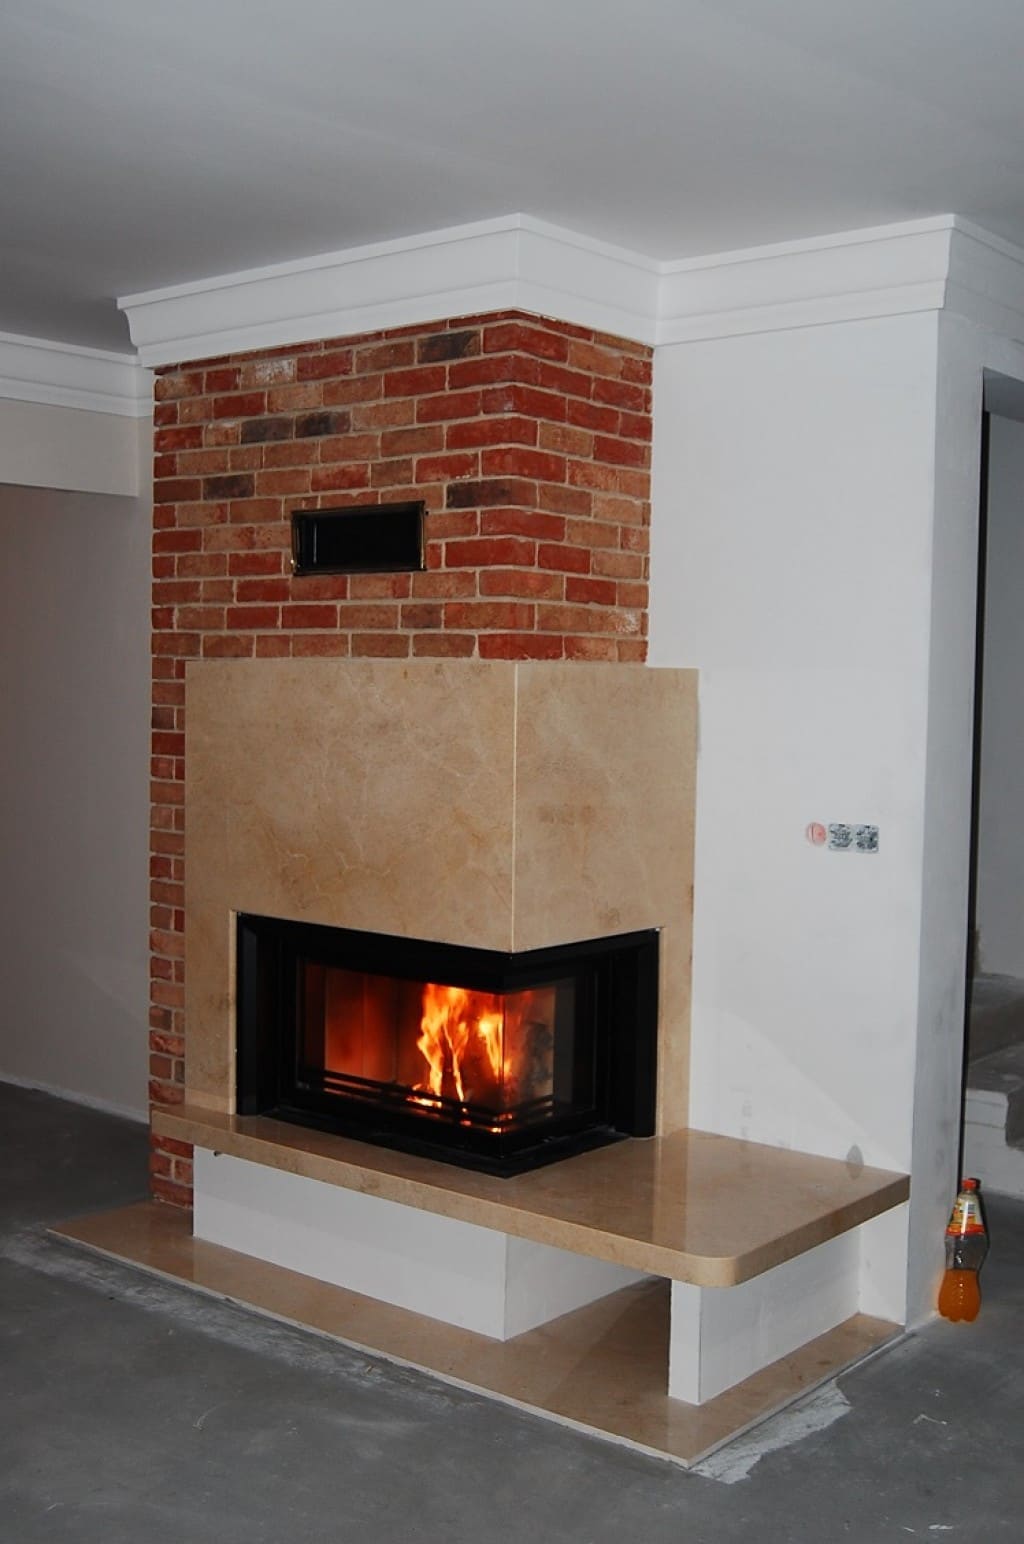 Blog - Fireplace accessories - in other words - what else do we need for our fireplace?